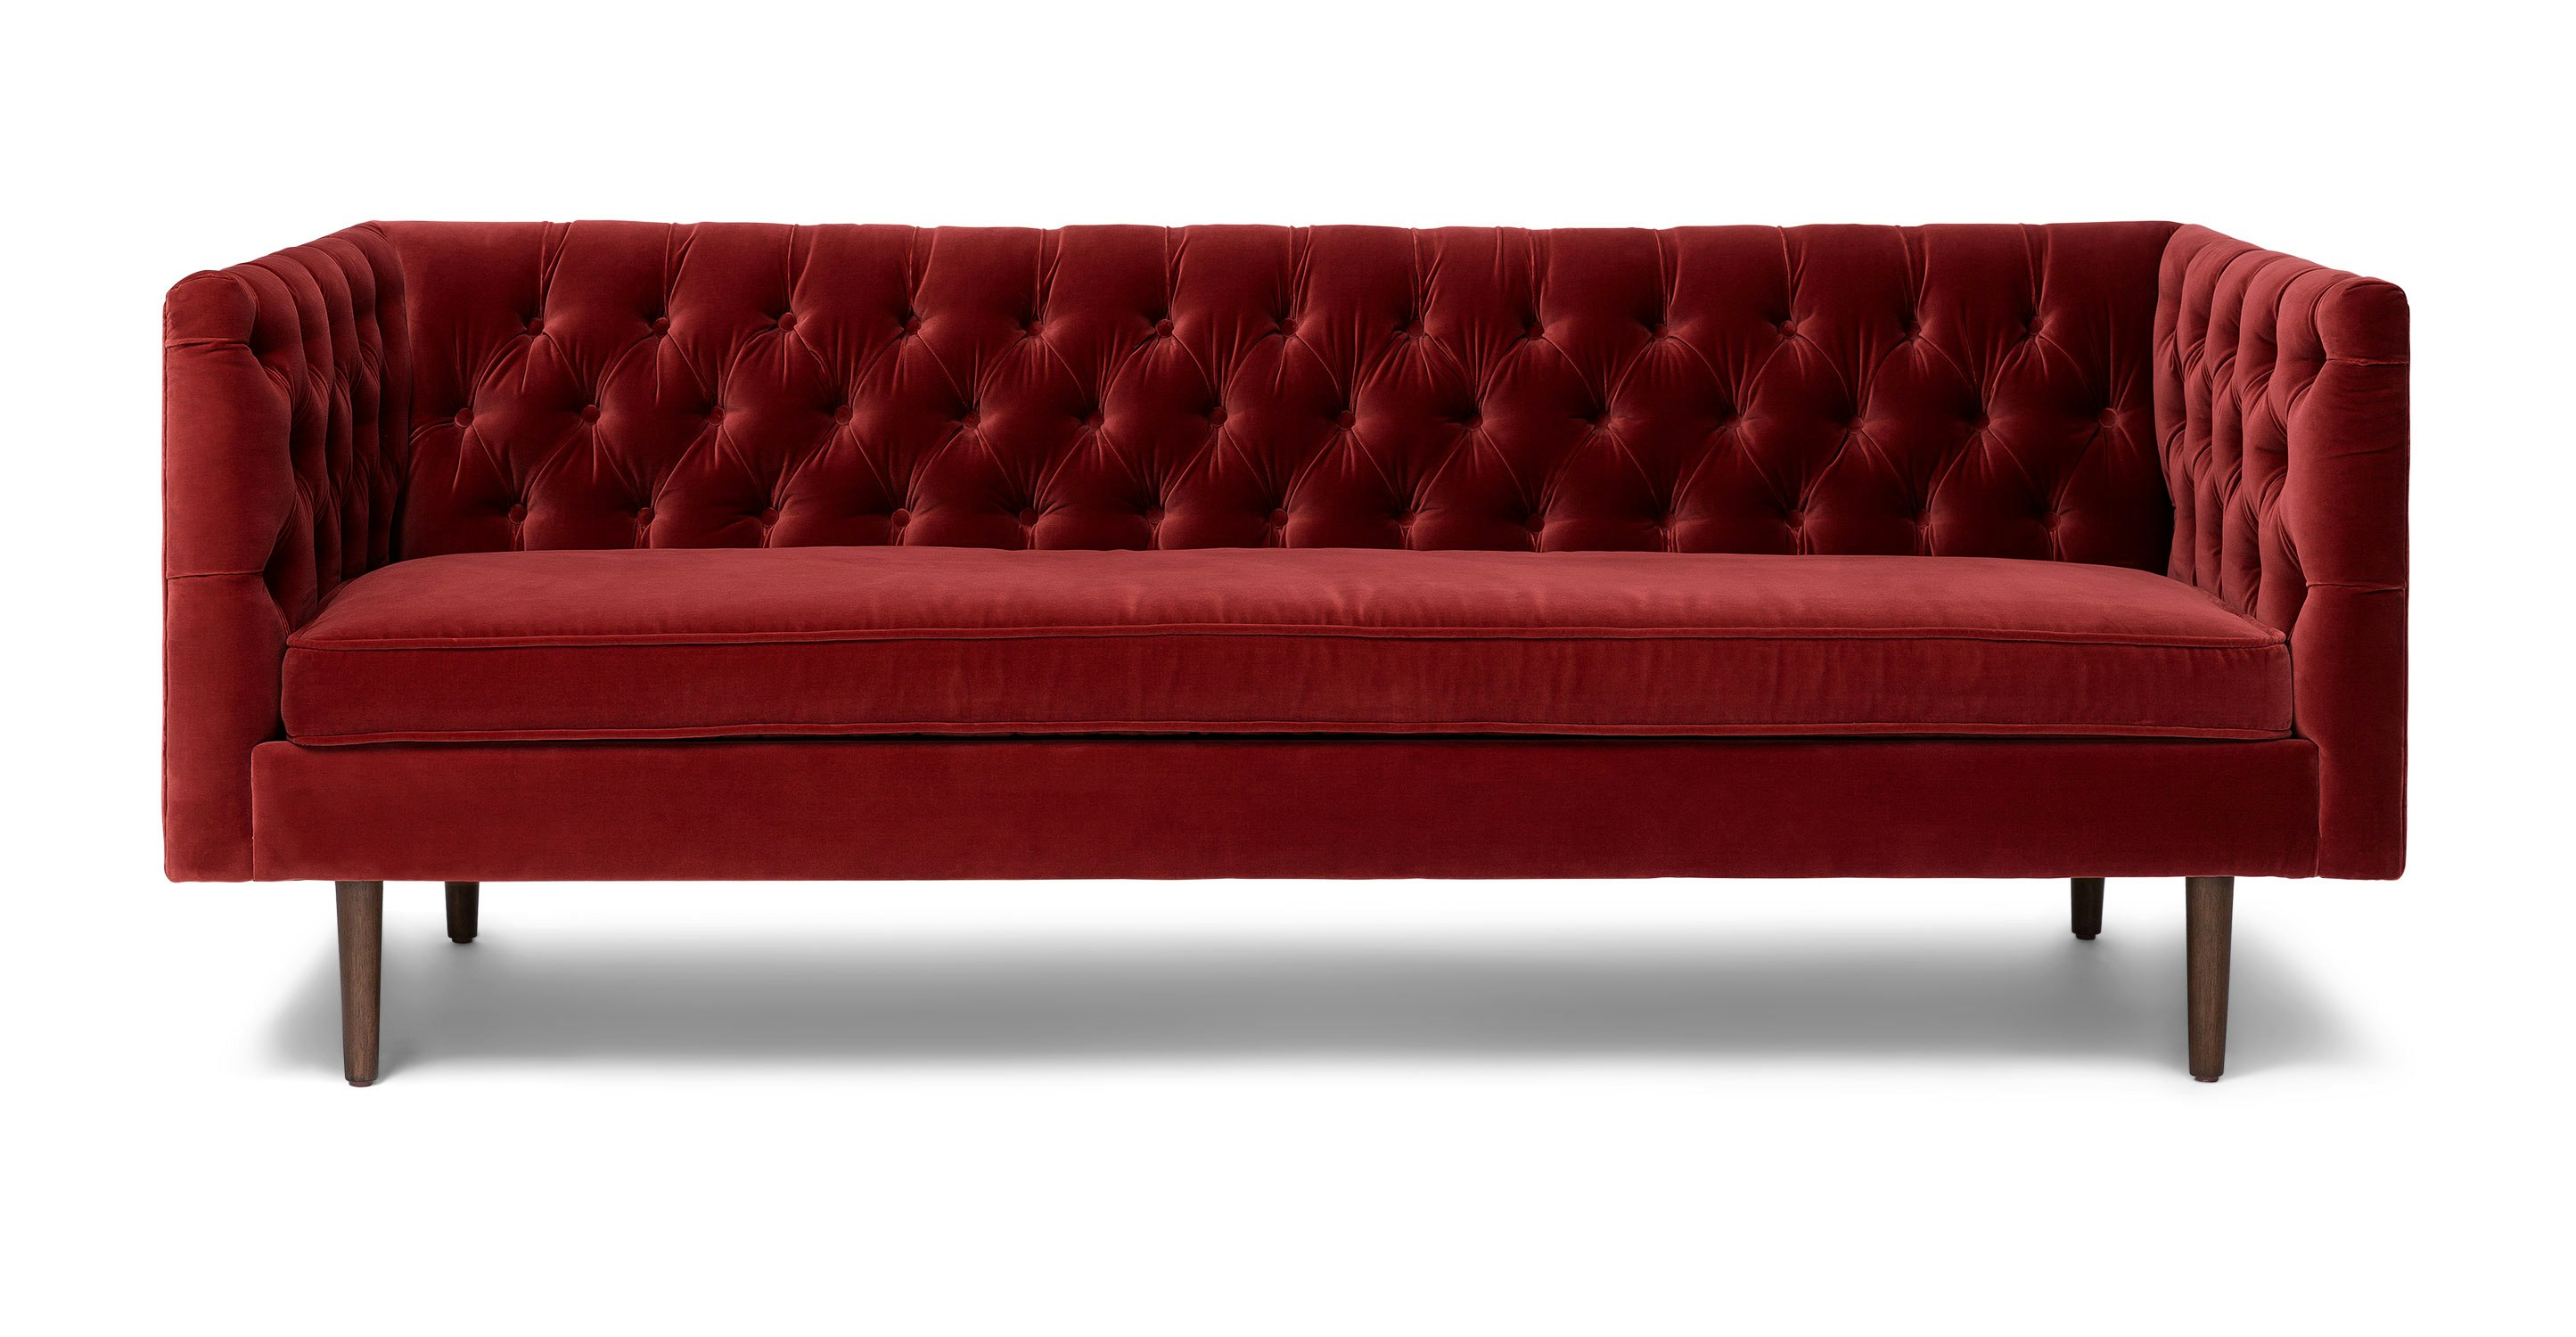 red modern sofa bed